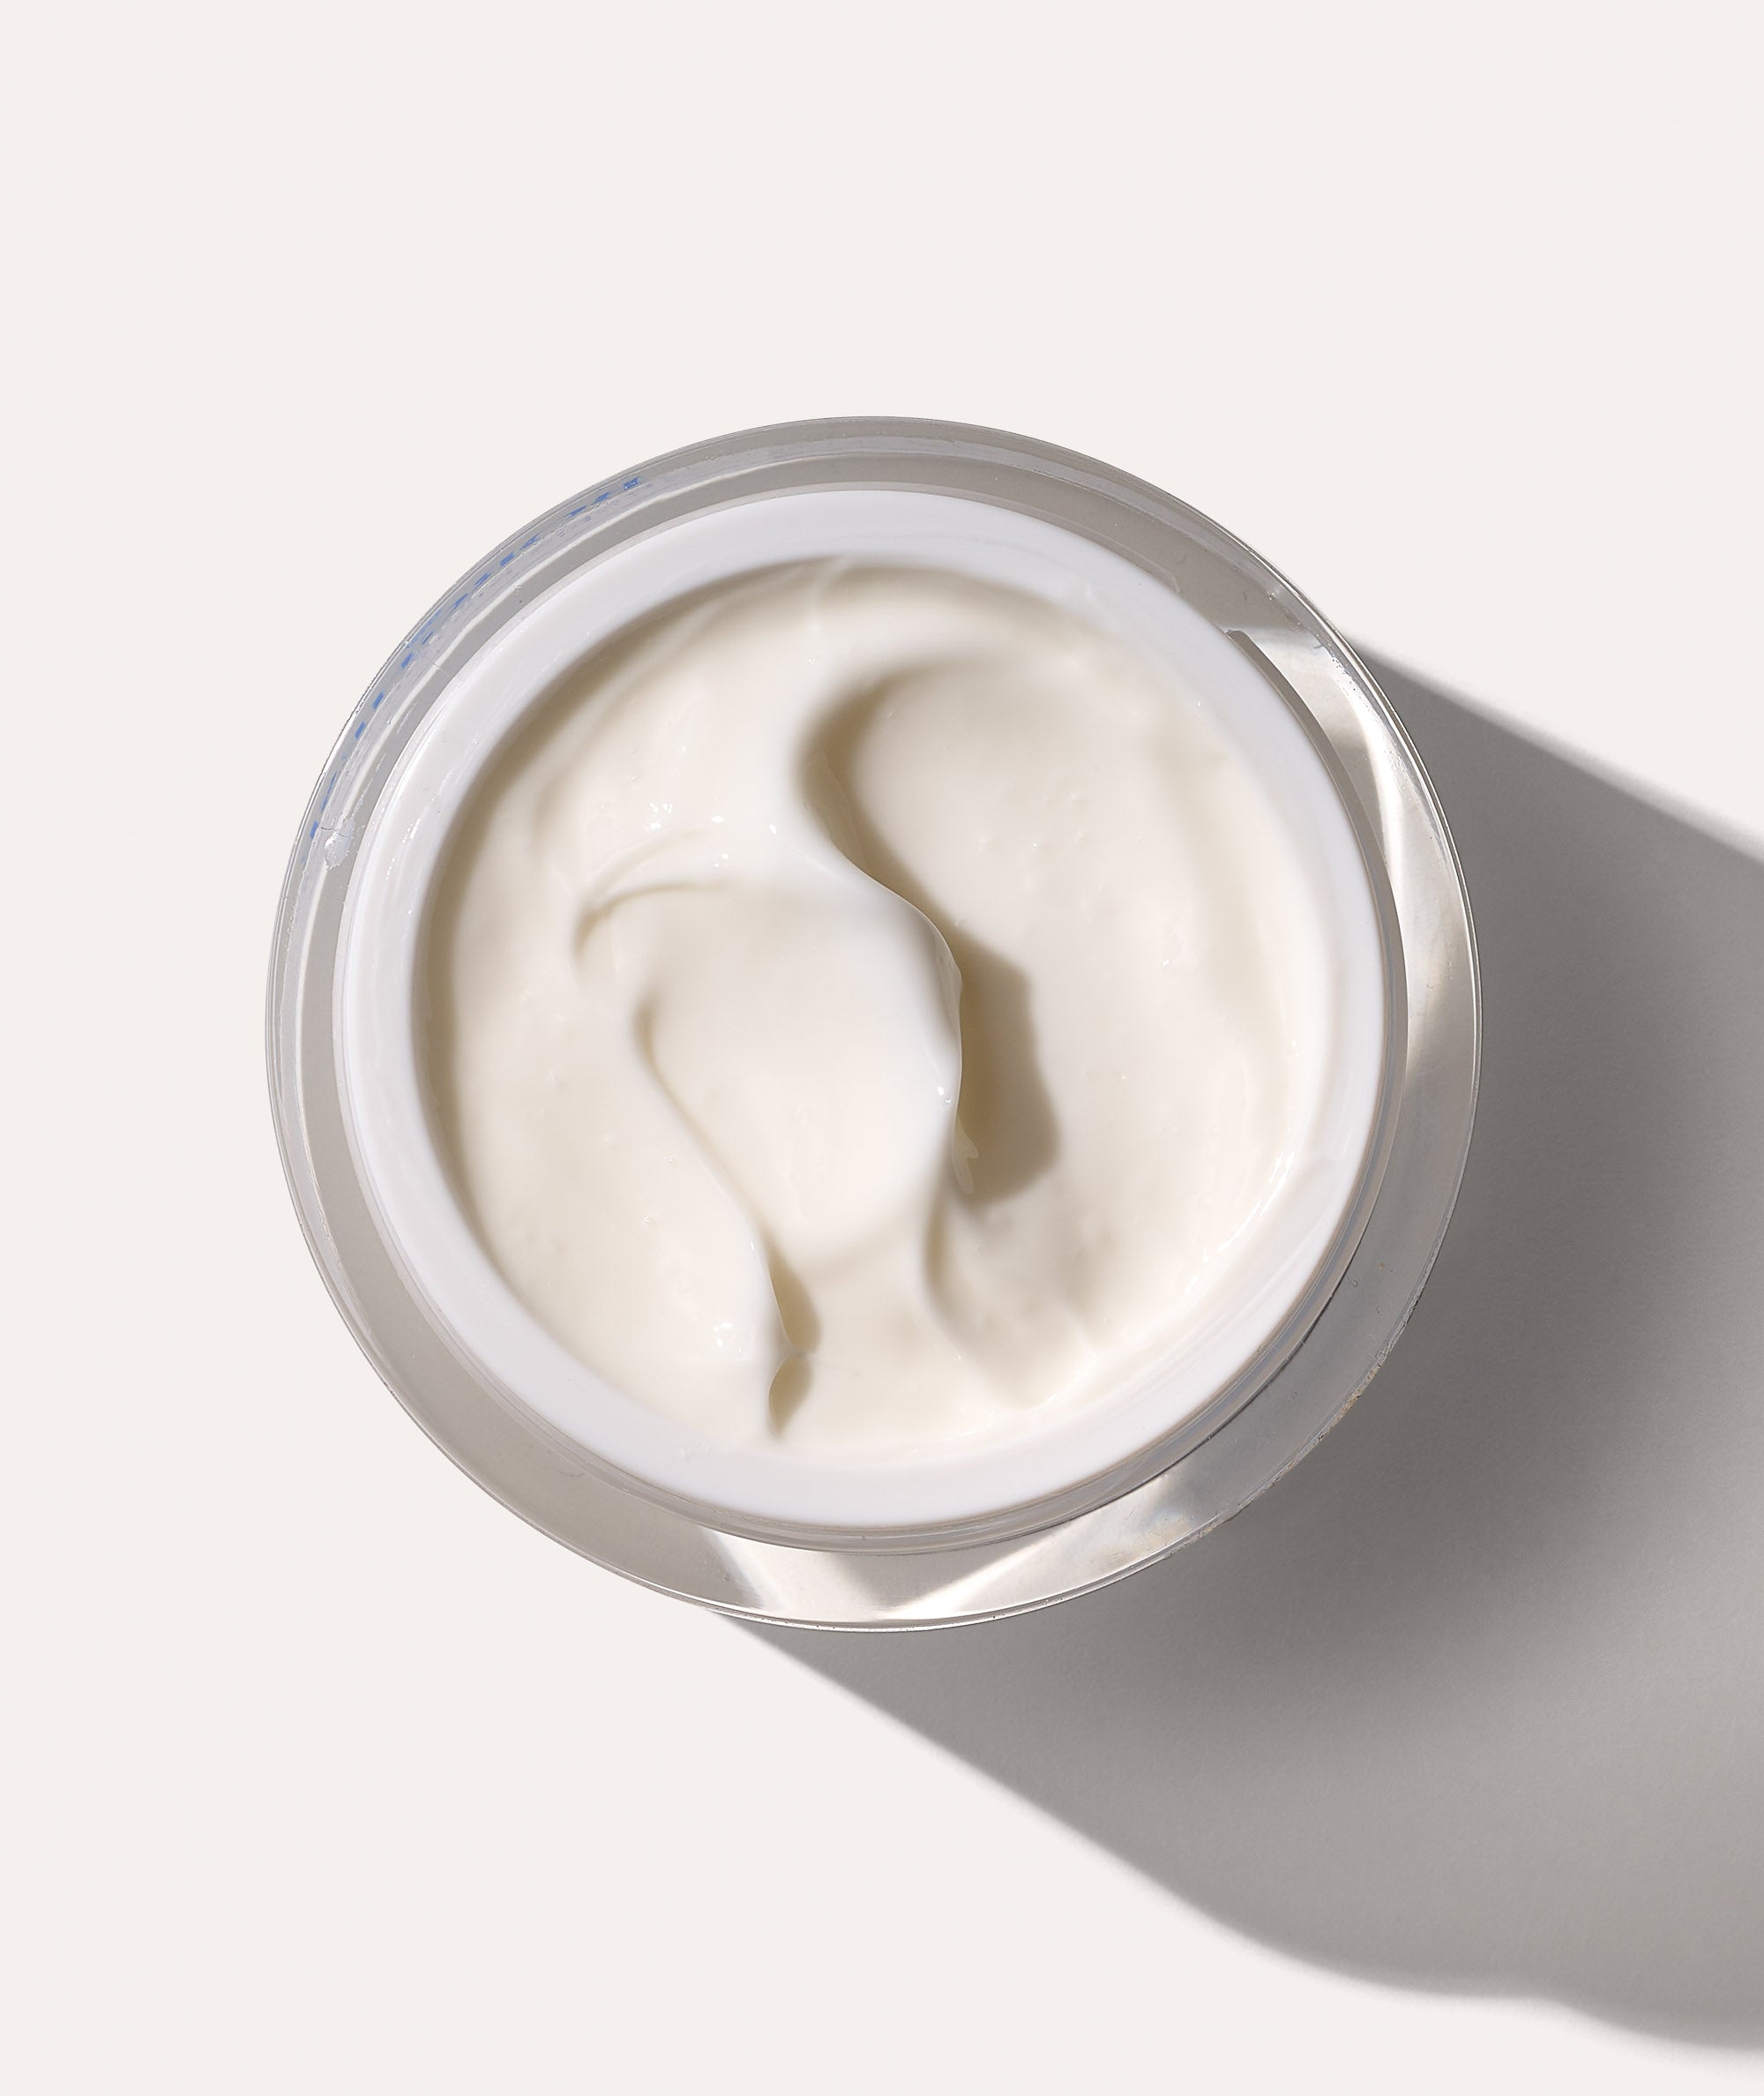 This is a picture of an opened Borghese Crema Ristorativo 24 Moisturizer jar